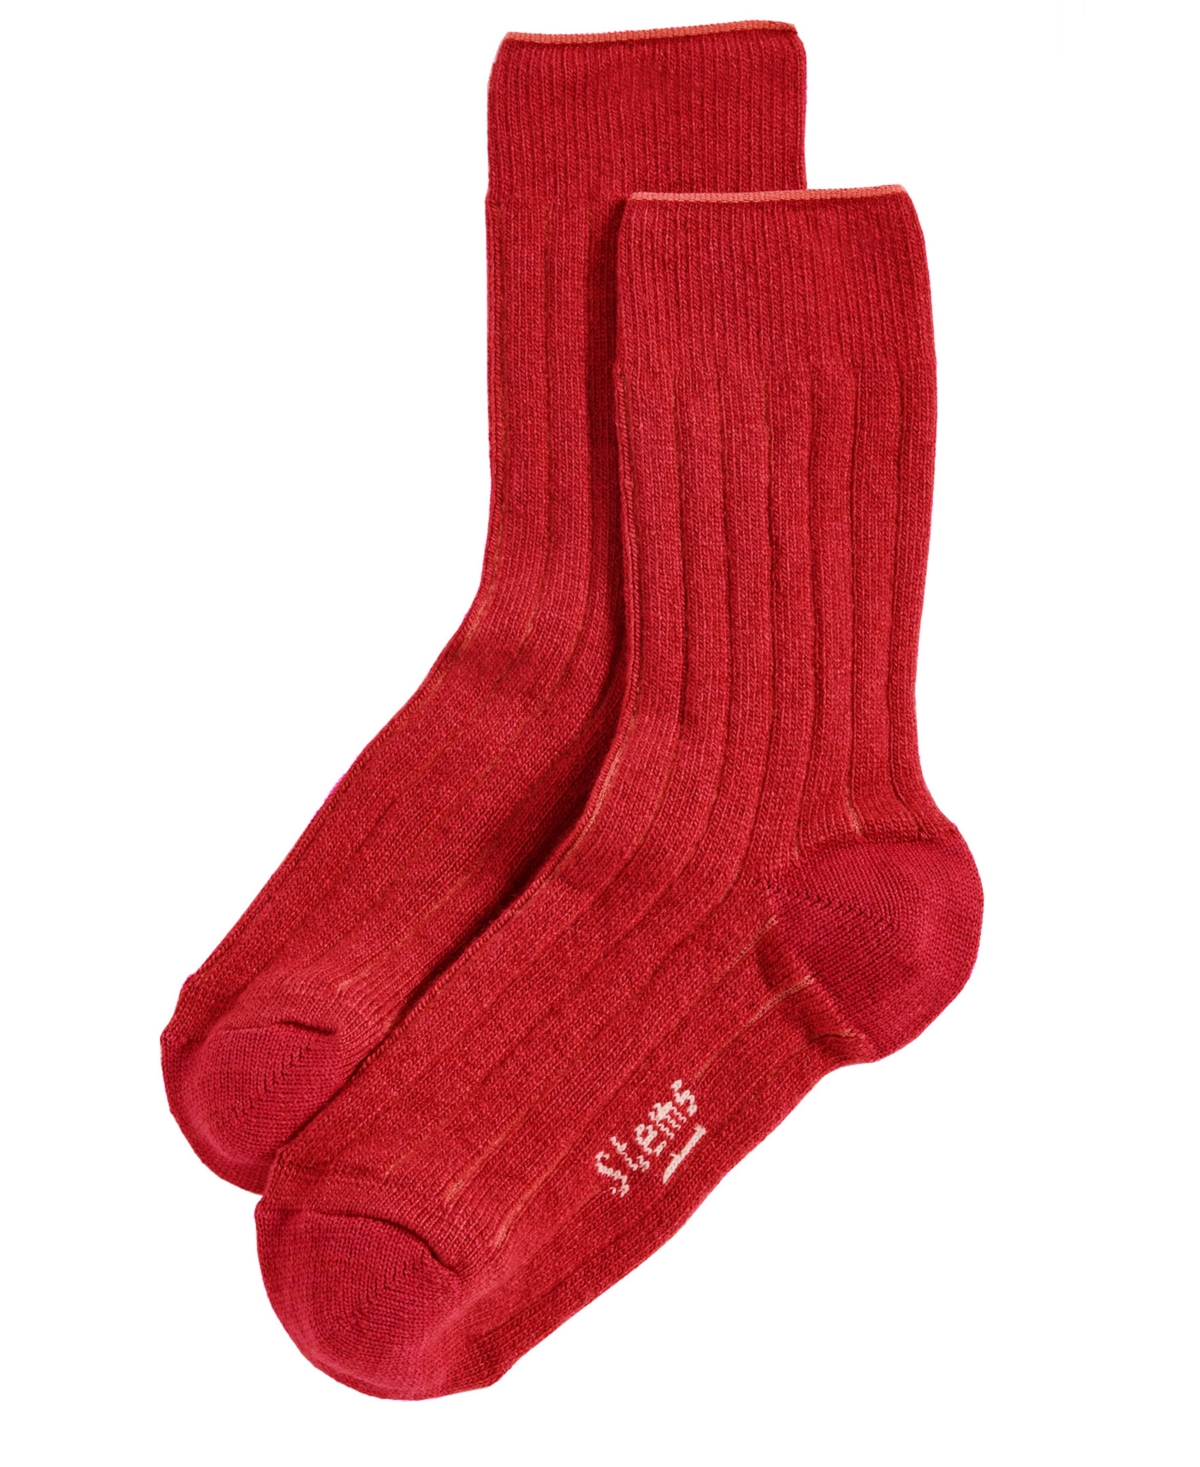 Women's Lux Cashmere Wool Crew Socks Gift Box - Red